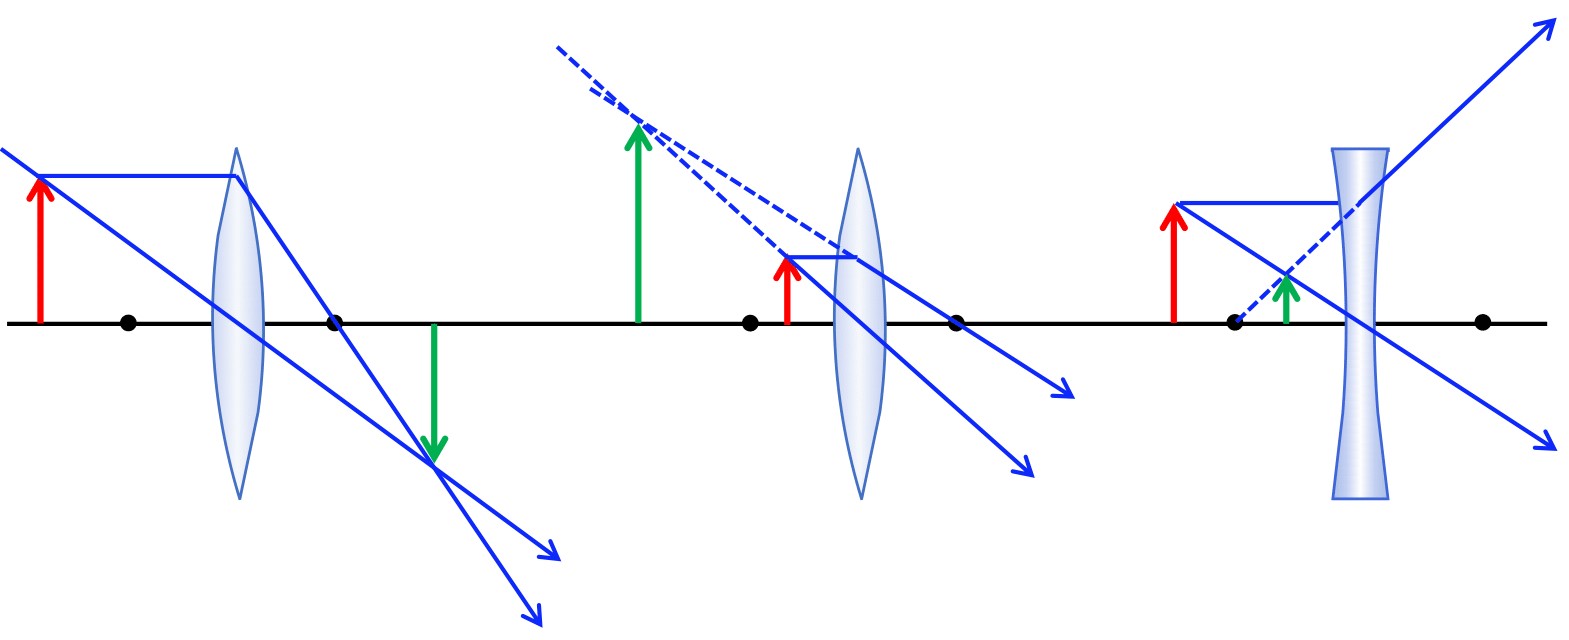 Three lens diagrams sit side by side. Each diagram has a red object arrow and a green image arrow, and two rays that travel from the object arrow, and through the lens. The intersection point of these arrows is where the green image arrow sits. The first is a converging lens diagram with the red arrow sitting on the left side of the lens and a green arrow sitting on the right side of the lens, upside down. The second diagram is a converging lens diagram with the red arrow sitting on the left side of the lens inside the focal length, and the green arrow sitting on the left side of the lens outside of the focal length. The third diagram is a diverging lens diagram with the red arrow sitting on the left side of the lens outside of the focal length, and the green arrow sitting on the left side of the lens inside the focal length.